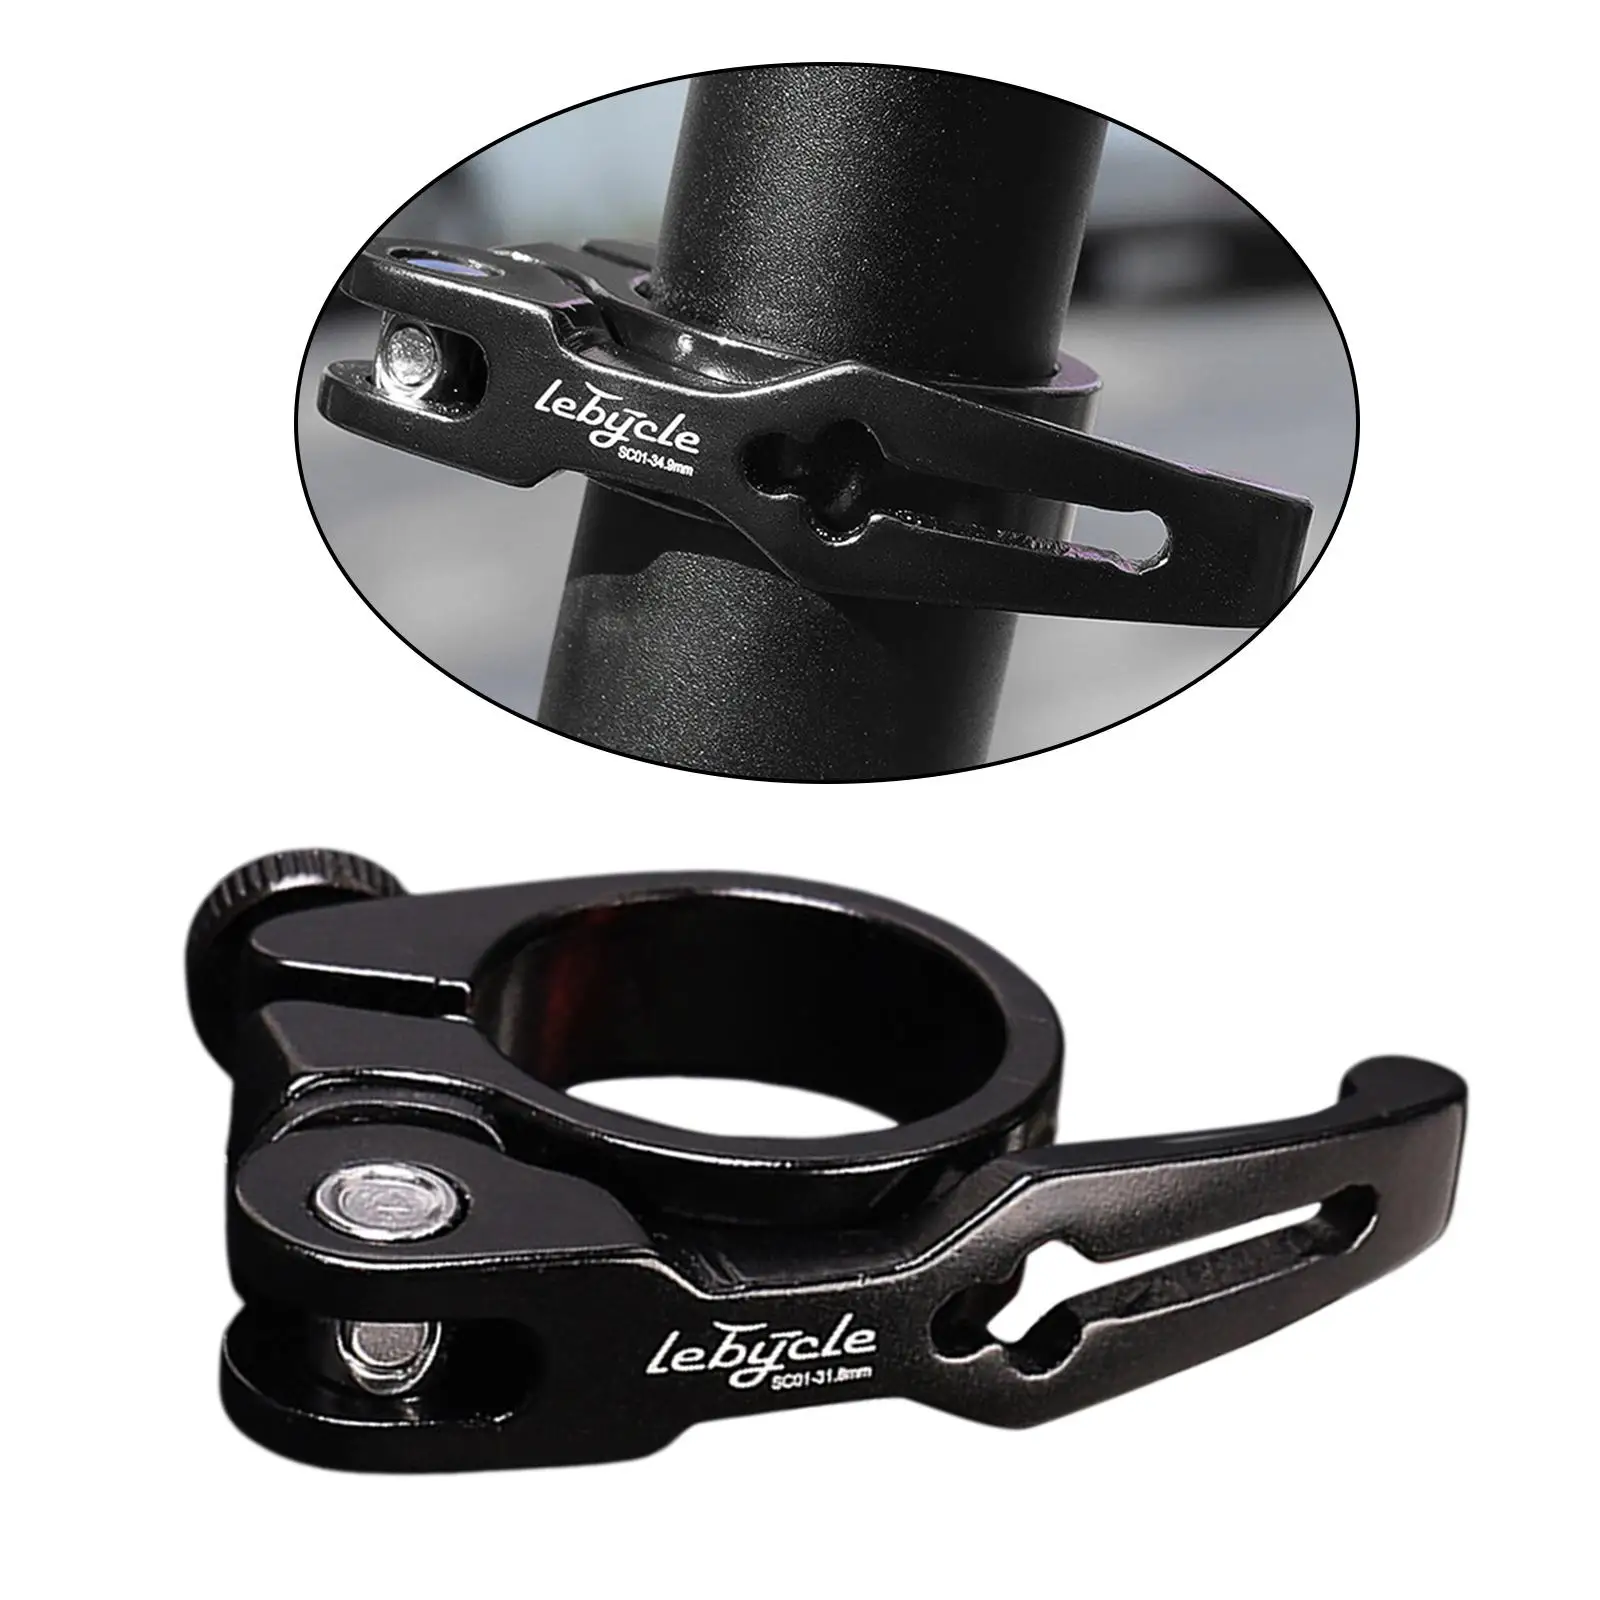 Alloy Bike Seatpost Clamp Quick Release MTB BMX Road Bicycle Cycling Tube Seat Post Collar Clip 31.8/34.9mm Repair Part